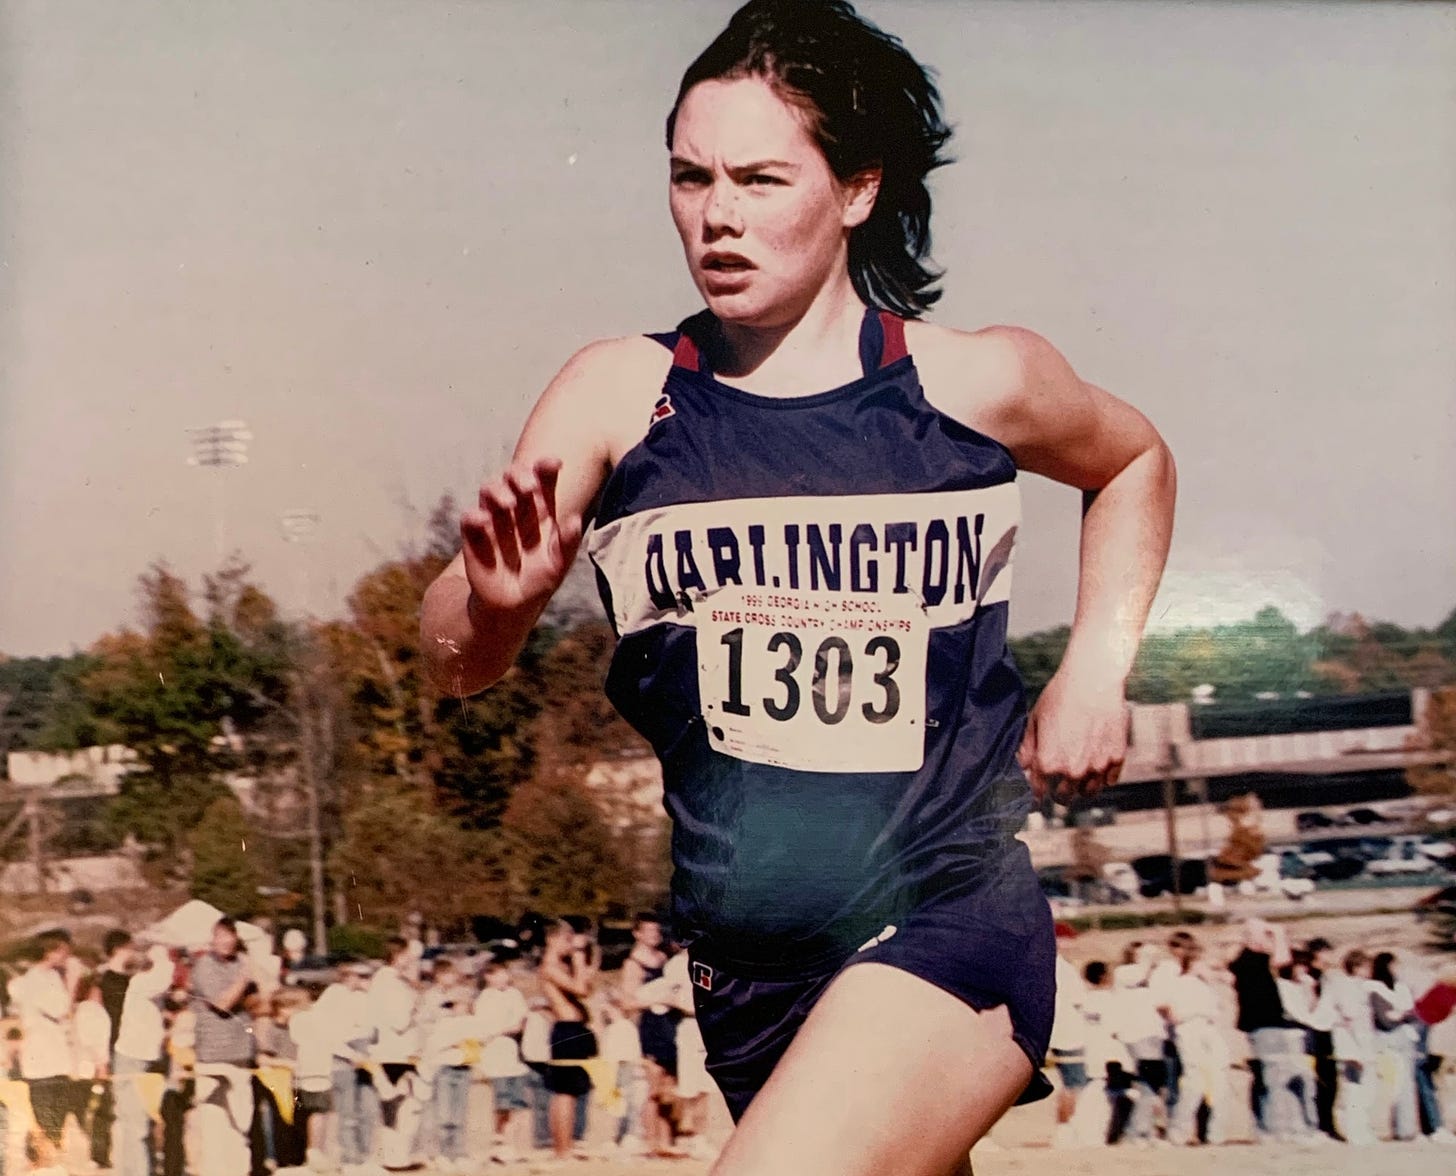 A photo of the author running in purple racing kit.